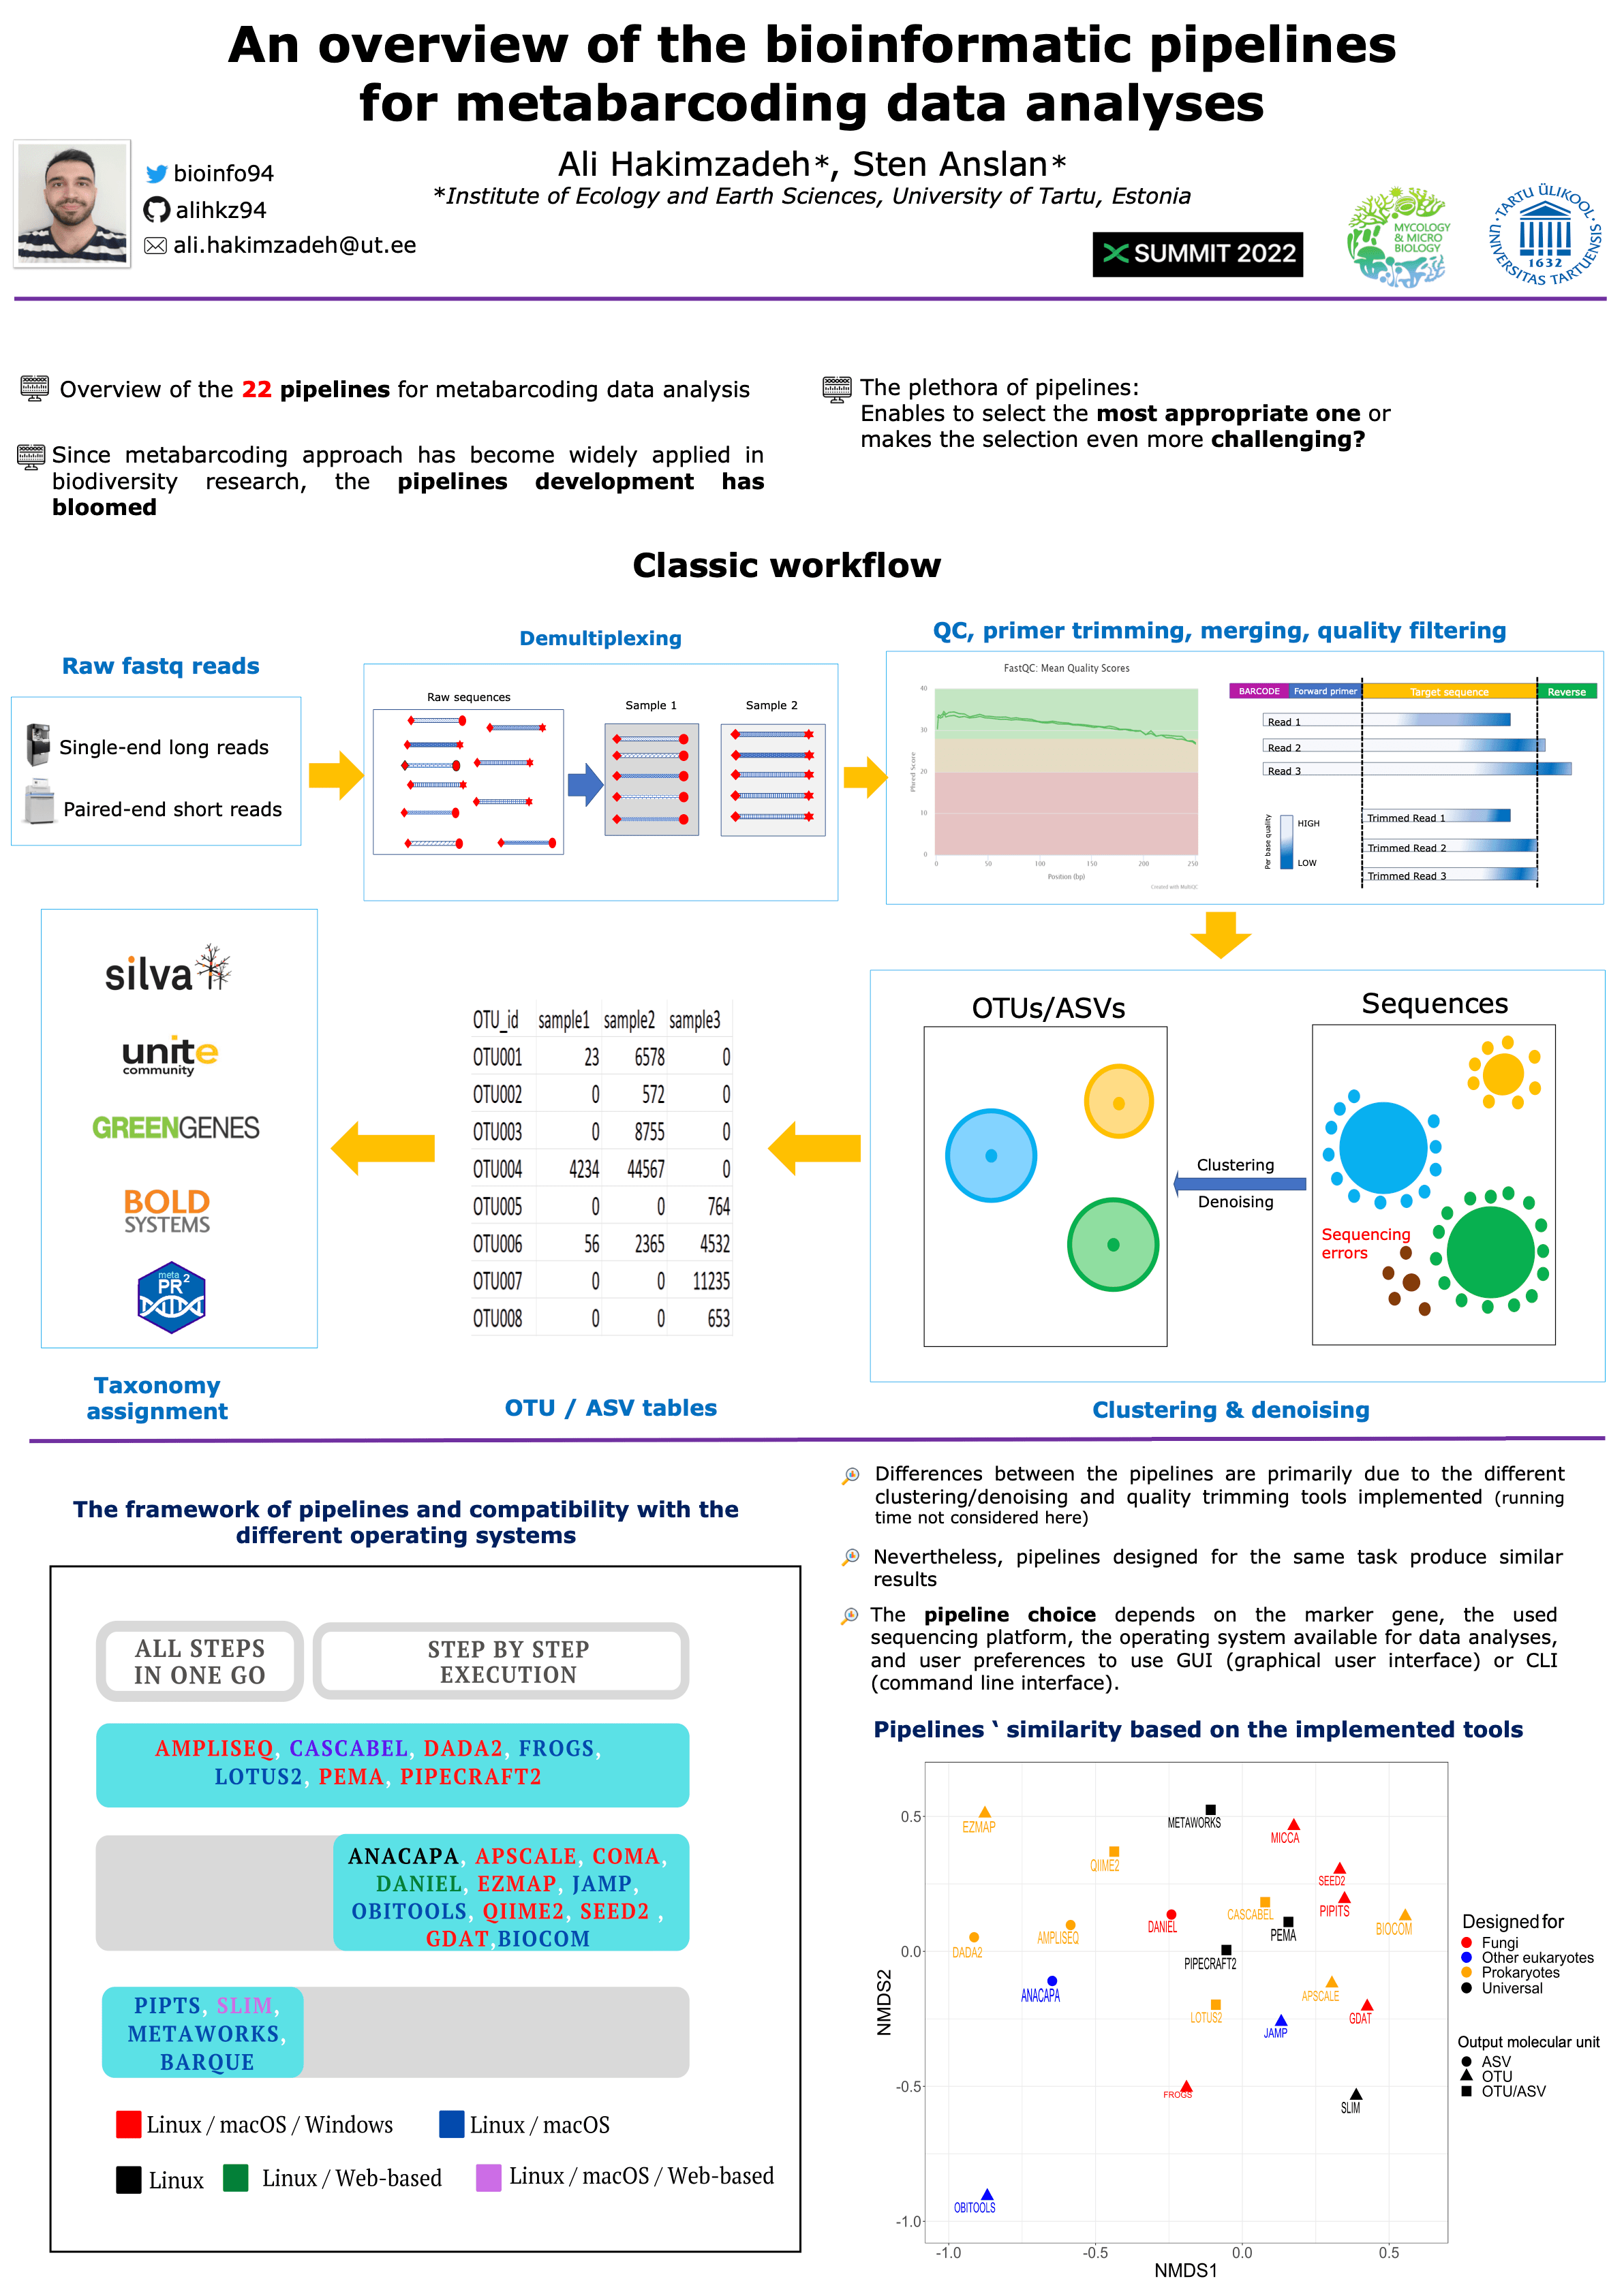 An Overview of Bioinformatic pipelines for metabarcoding data analyses